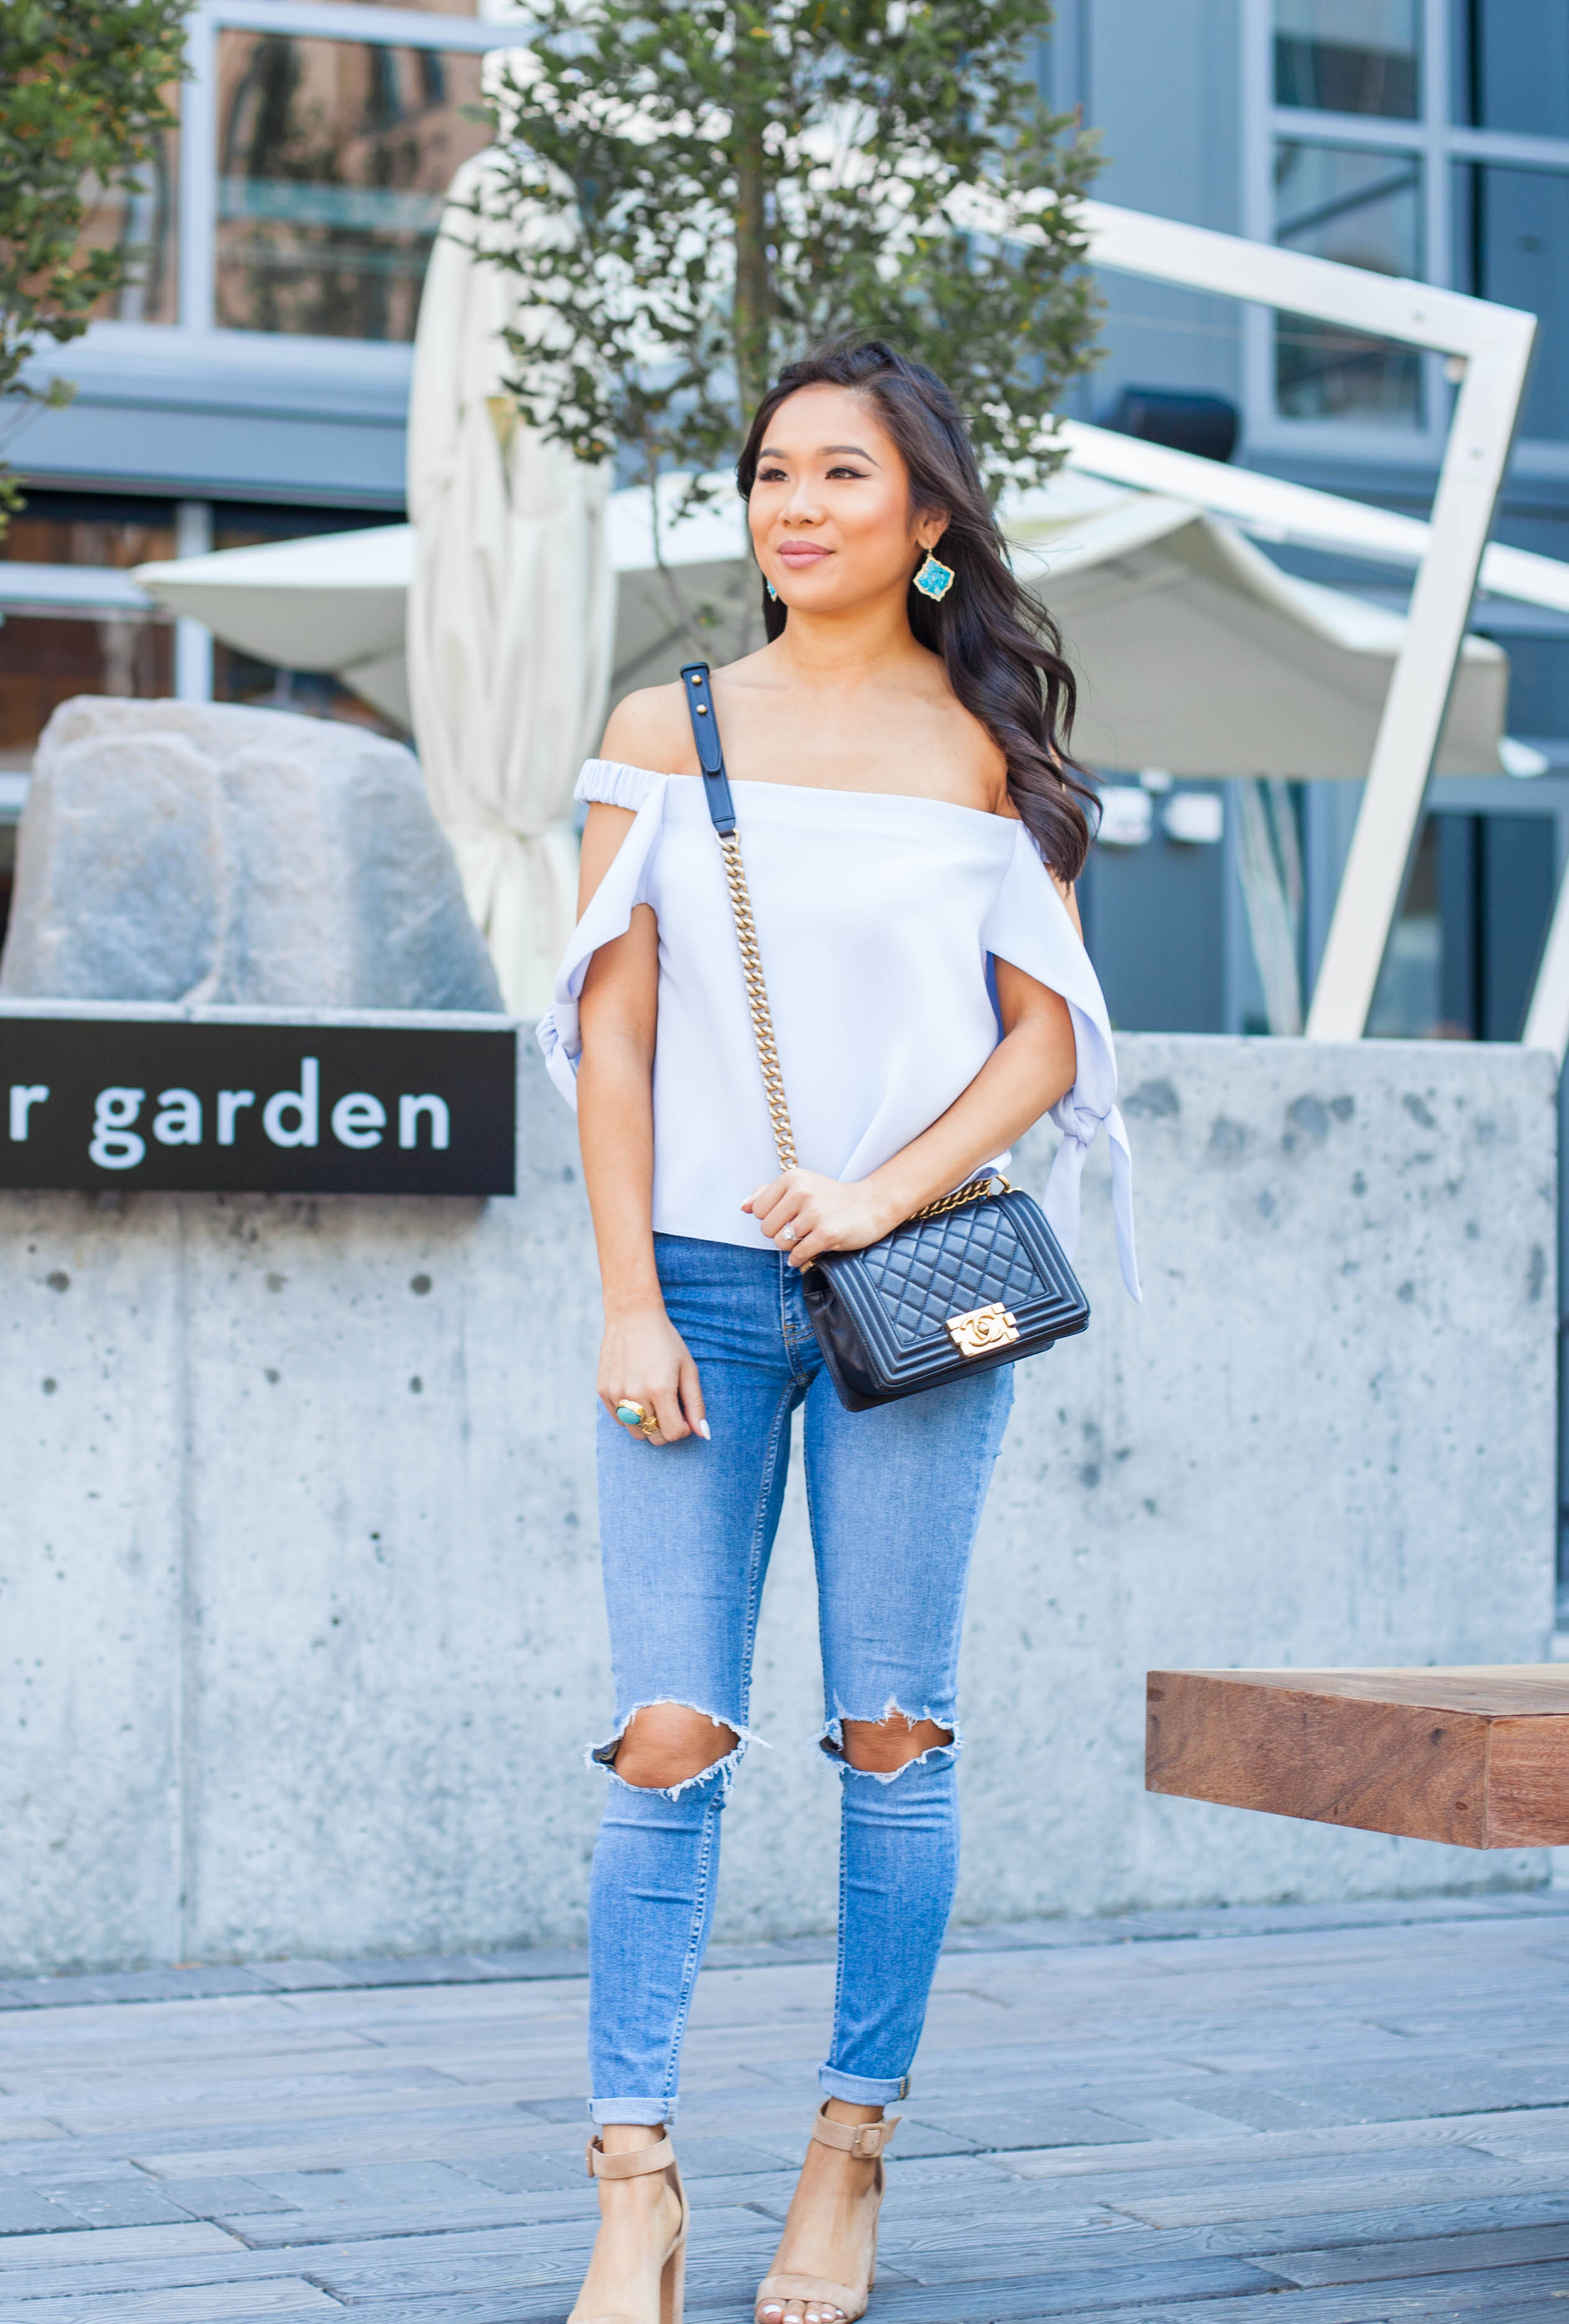 COLOR & CHIC | Off the shoulder top with tie sleeves, distressed jeans and Chanel boy bag